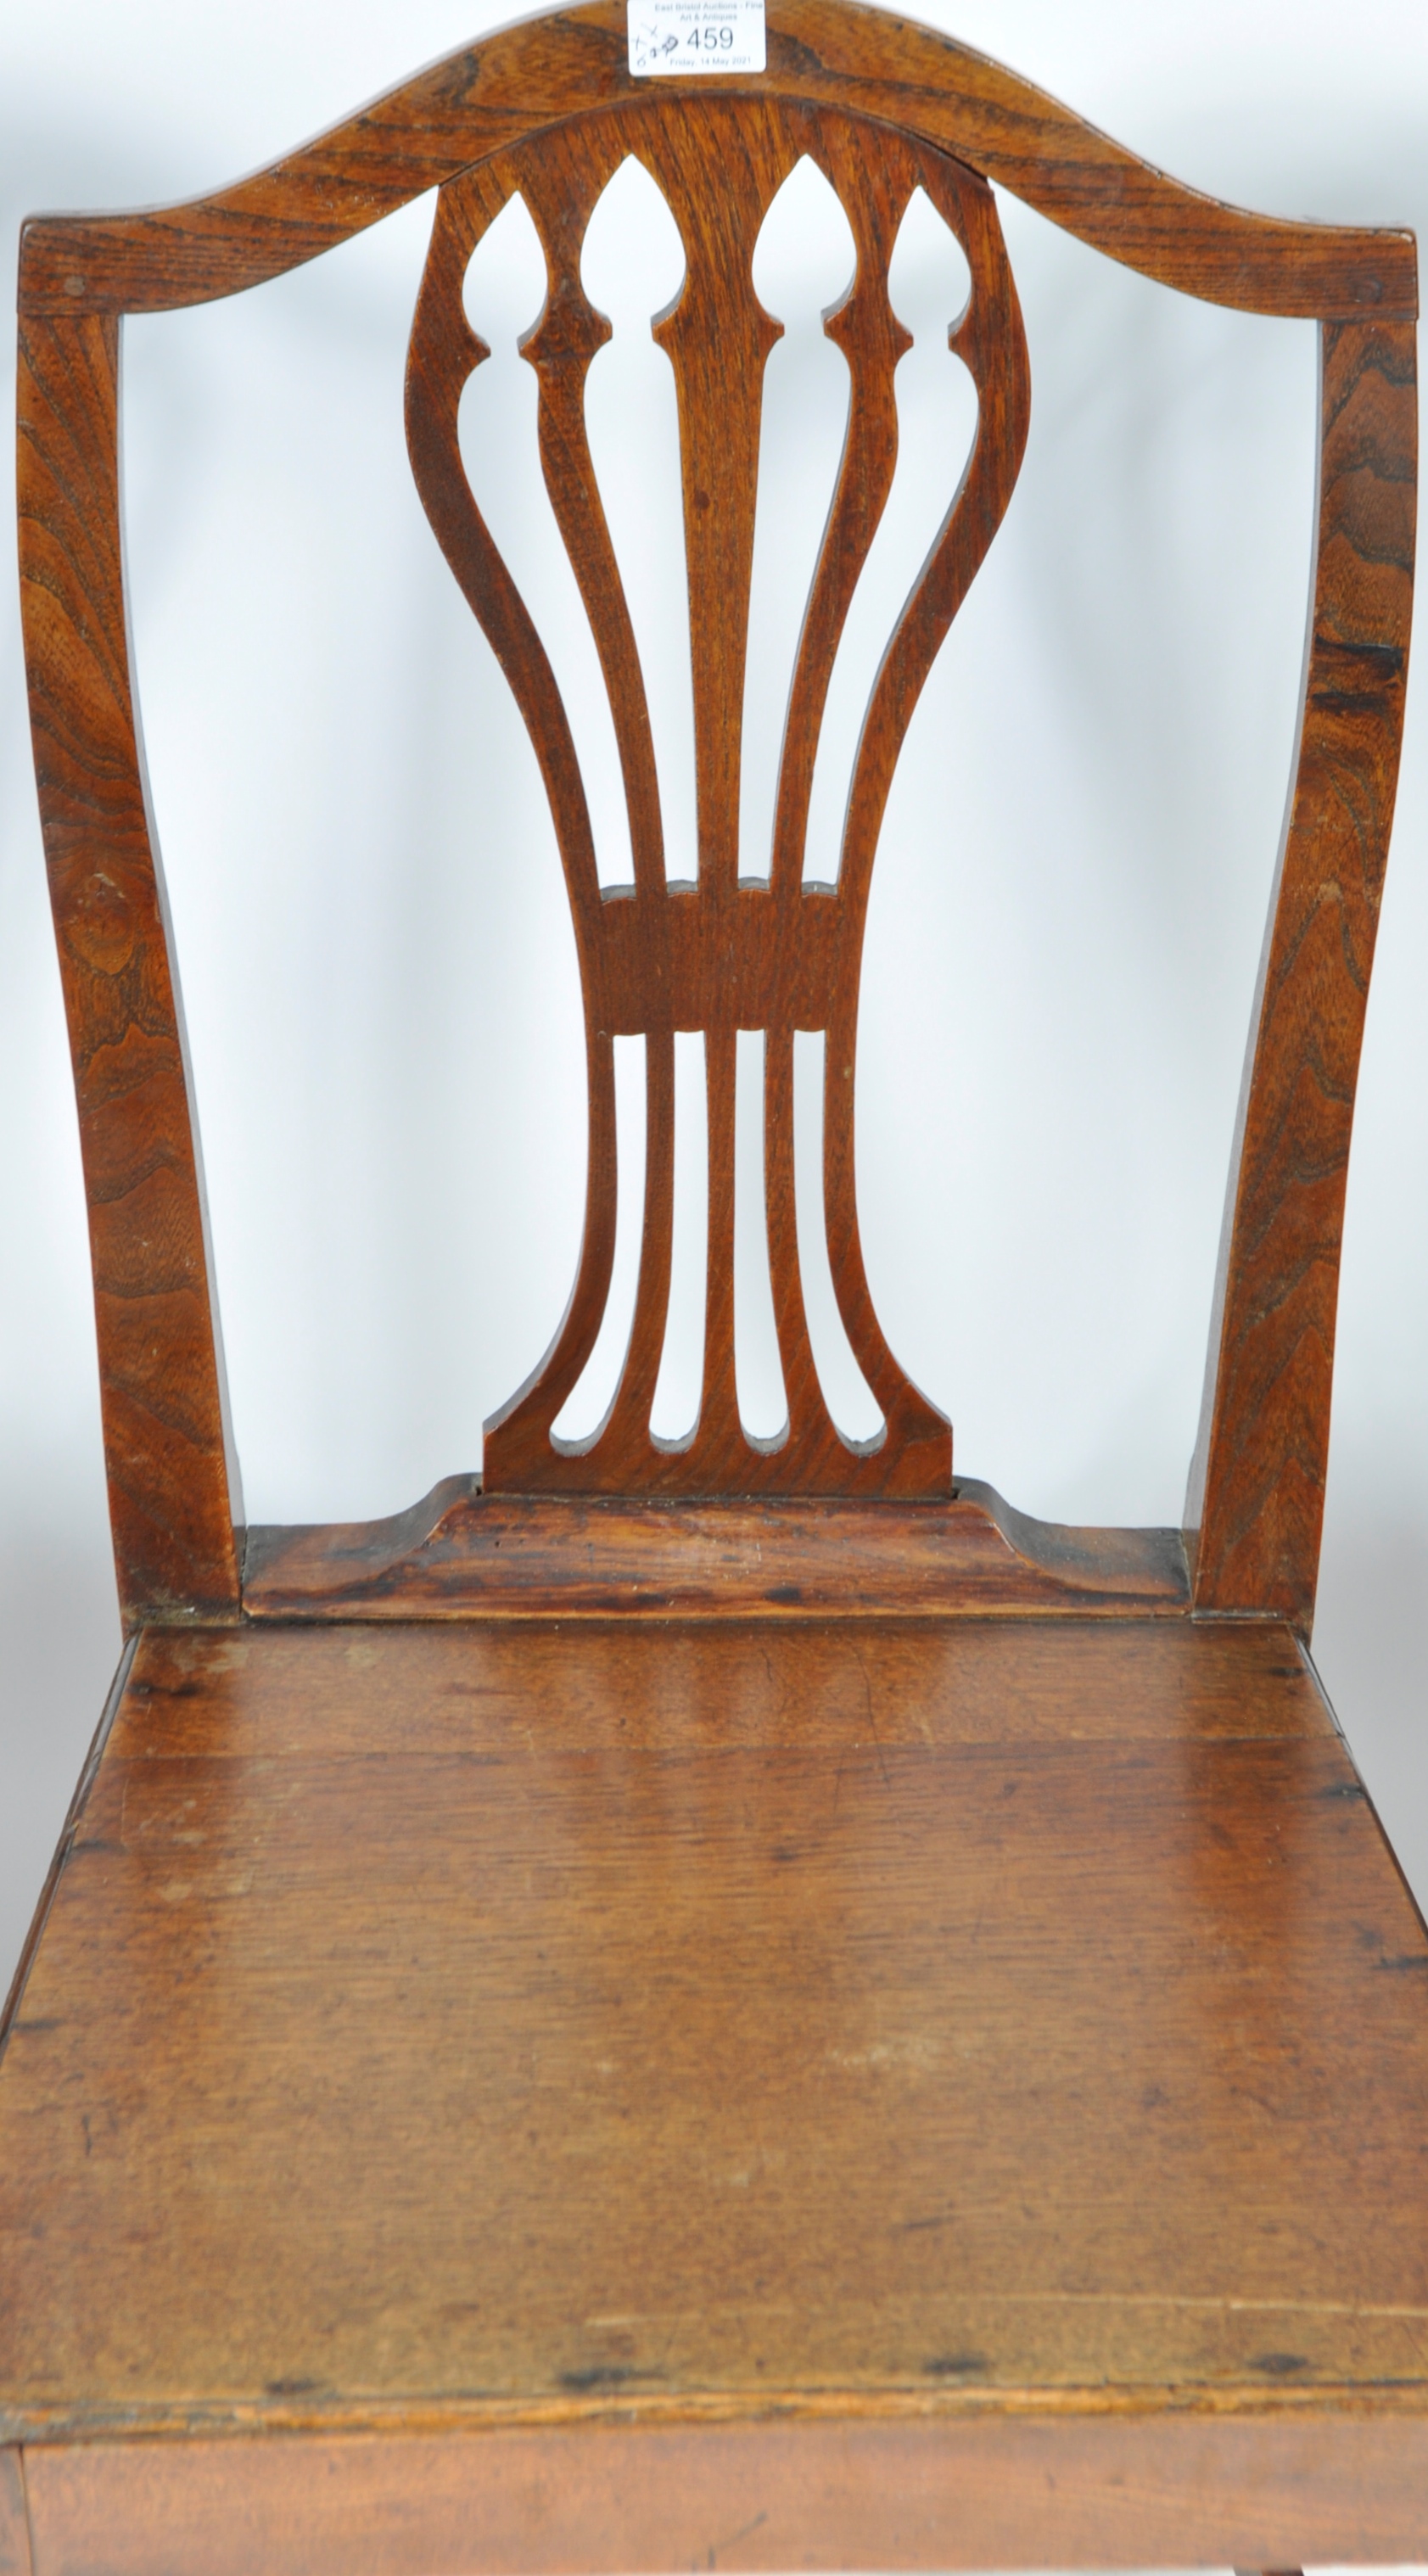 SET OF SIX 18TH CENTURY CHIPPENDALE STYLE OAK & ELM DINING CHAIRS - Image 9 of 11